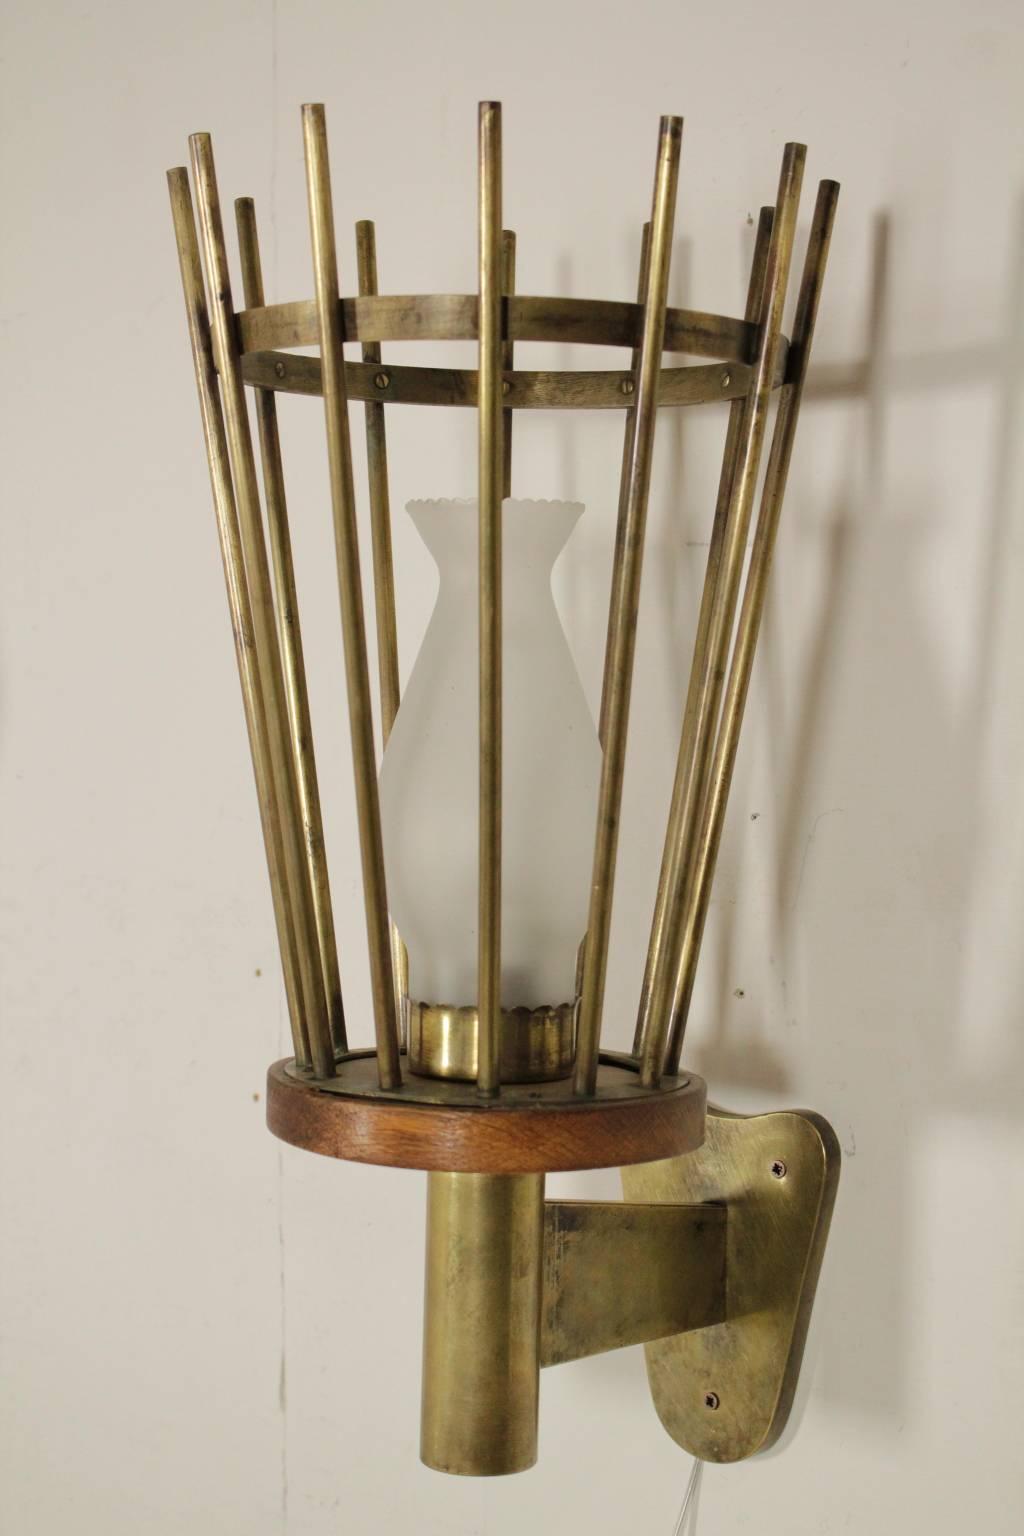 Mid-Century Modern Wall Lamp in the Gino Sarfatti Style Brass Glass Wood Vintage Italy, 1950s